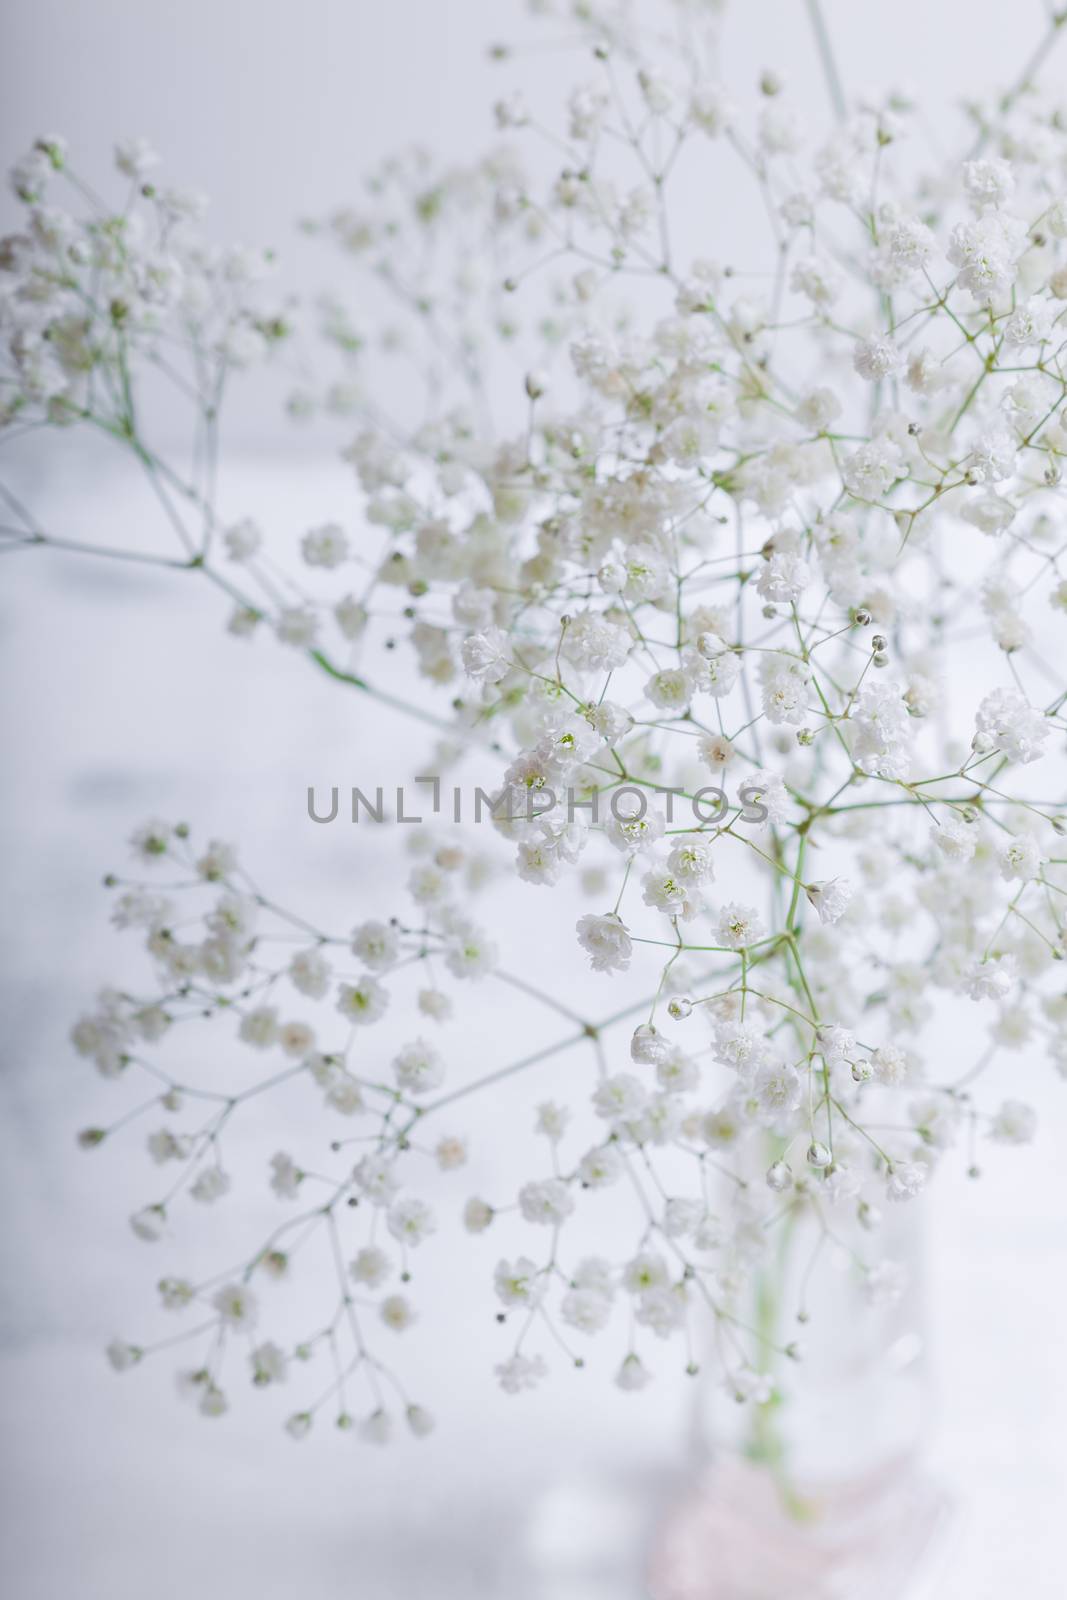 A white flowers of Gypsophila on a white background.